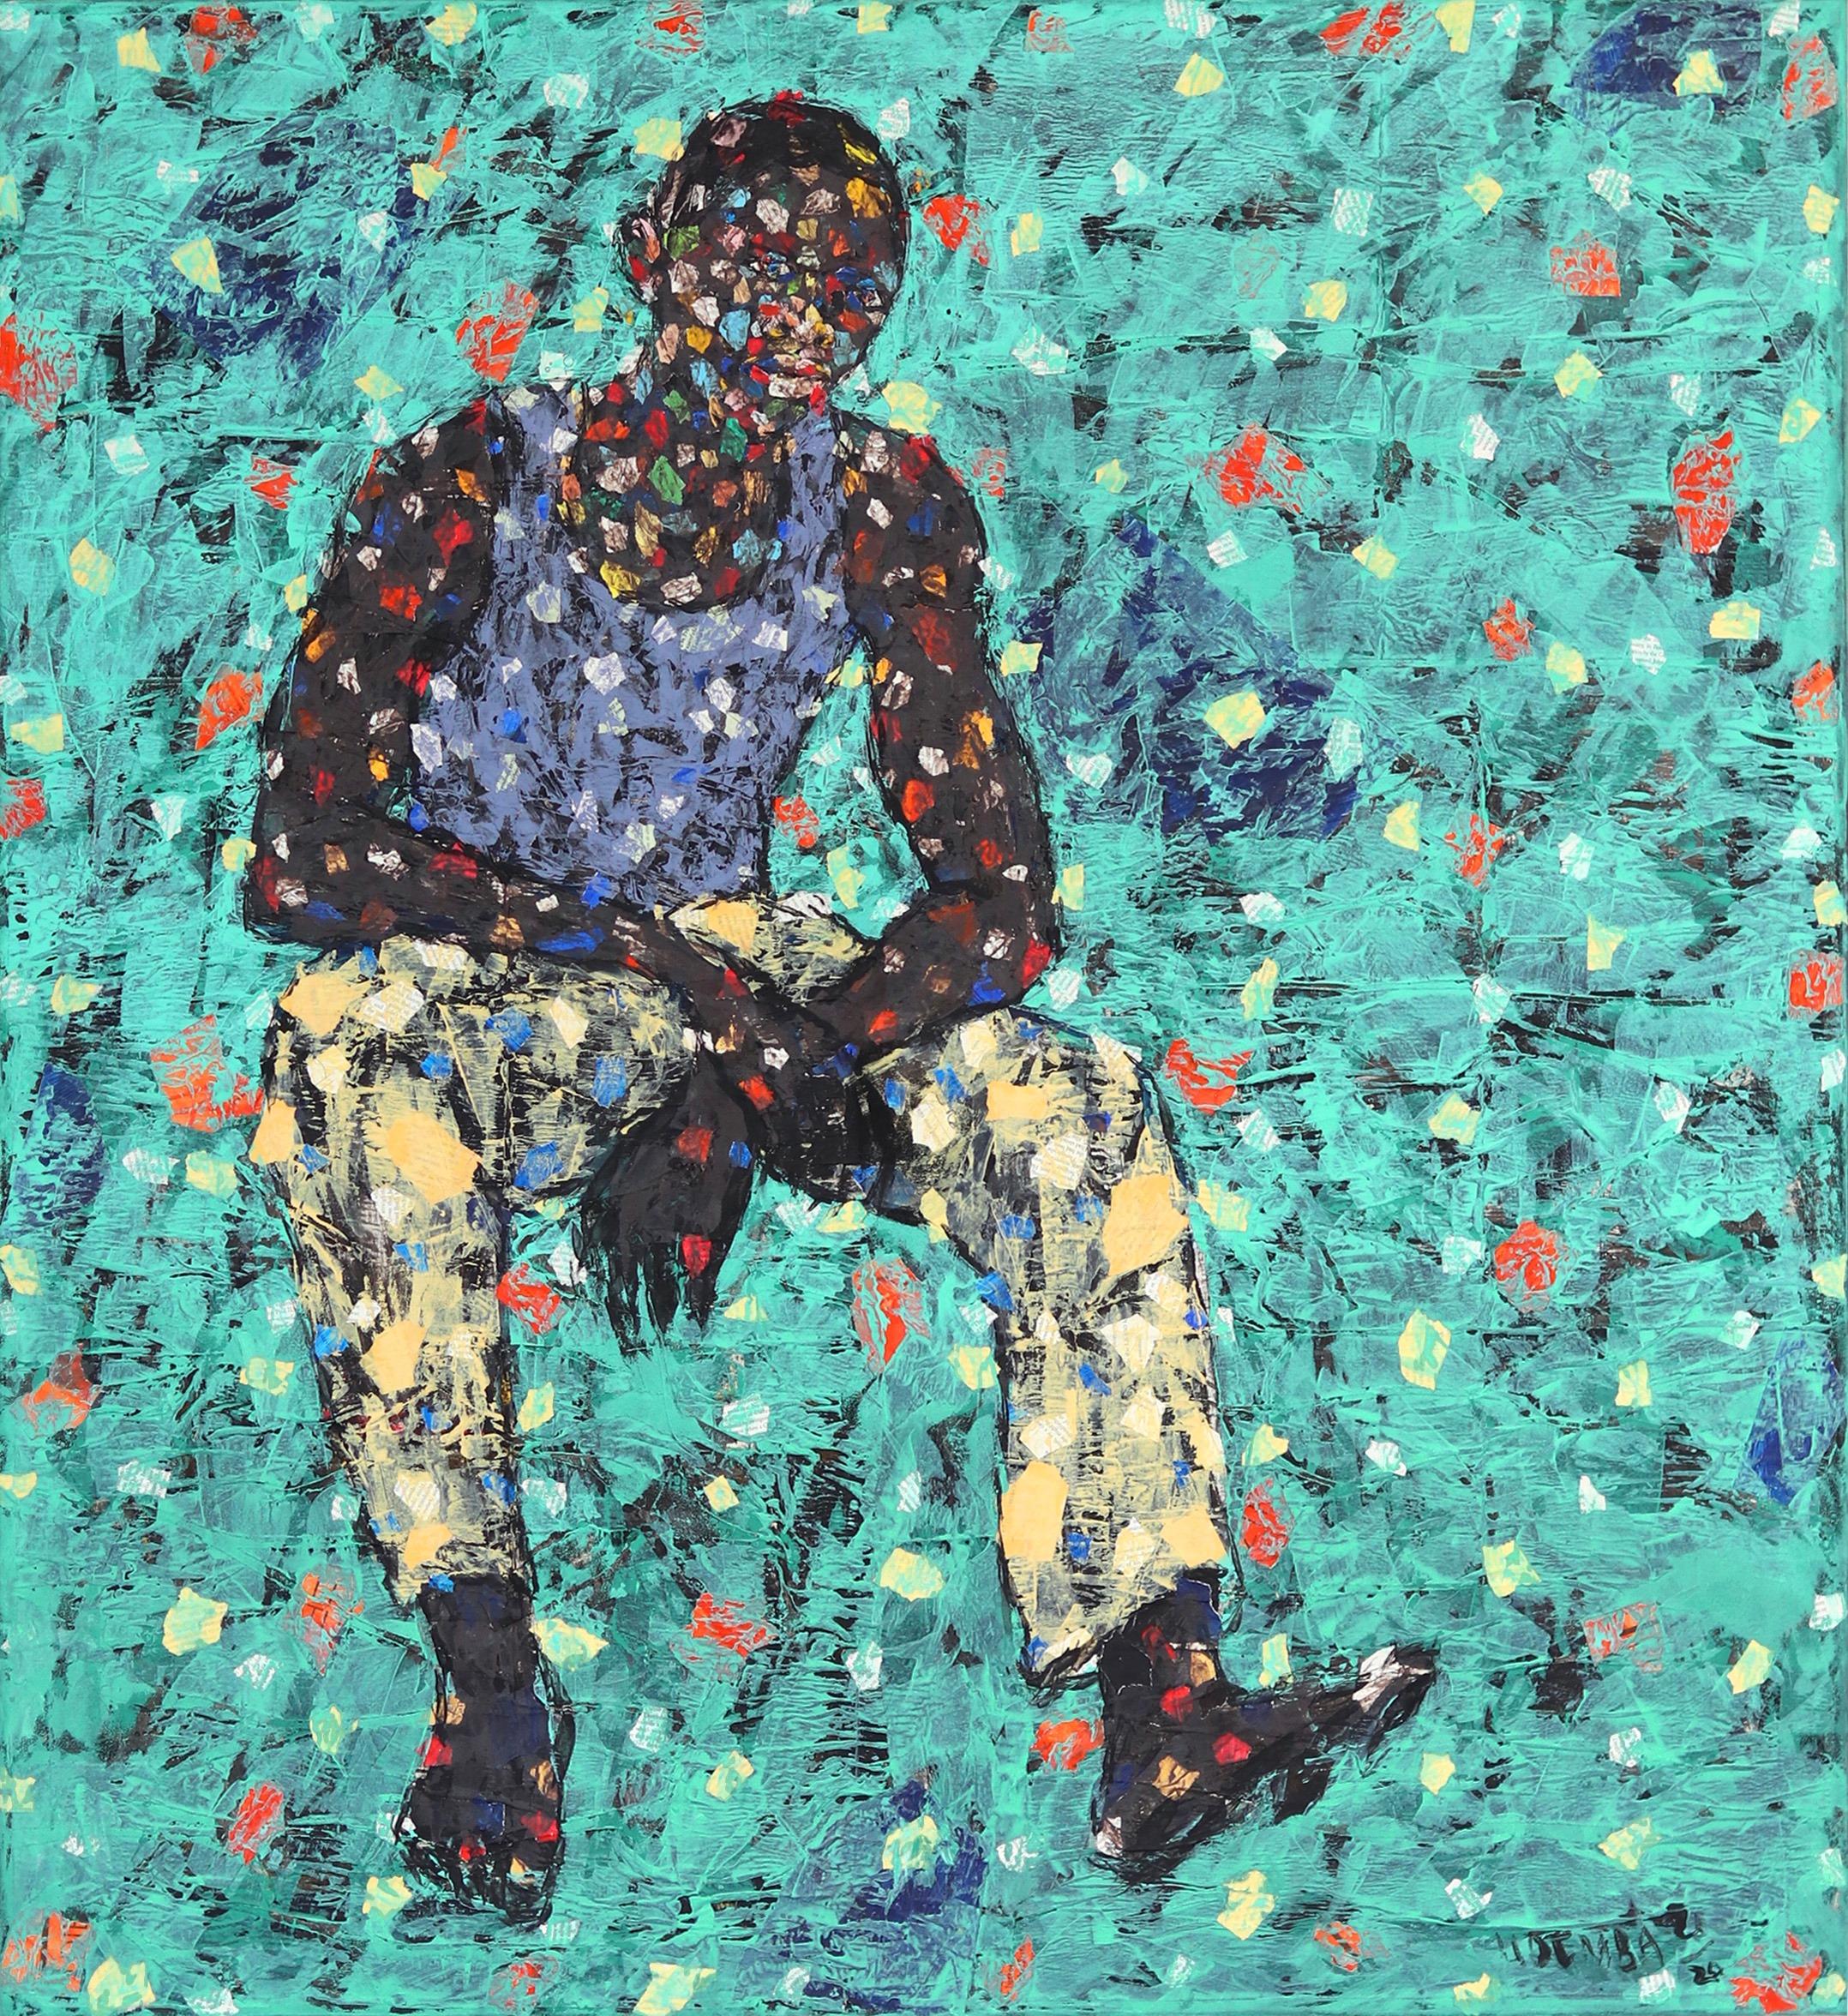 Centering his mixed-media artworks within his identity as a person of color who lives in an evolving “global environment”, Emeka Udemba creates figurative artworks which offer space for speculations, free-flow of ideas, discoveries, and